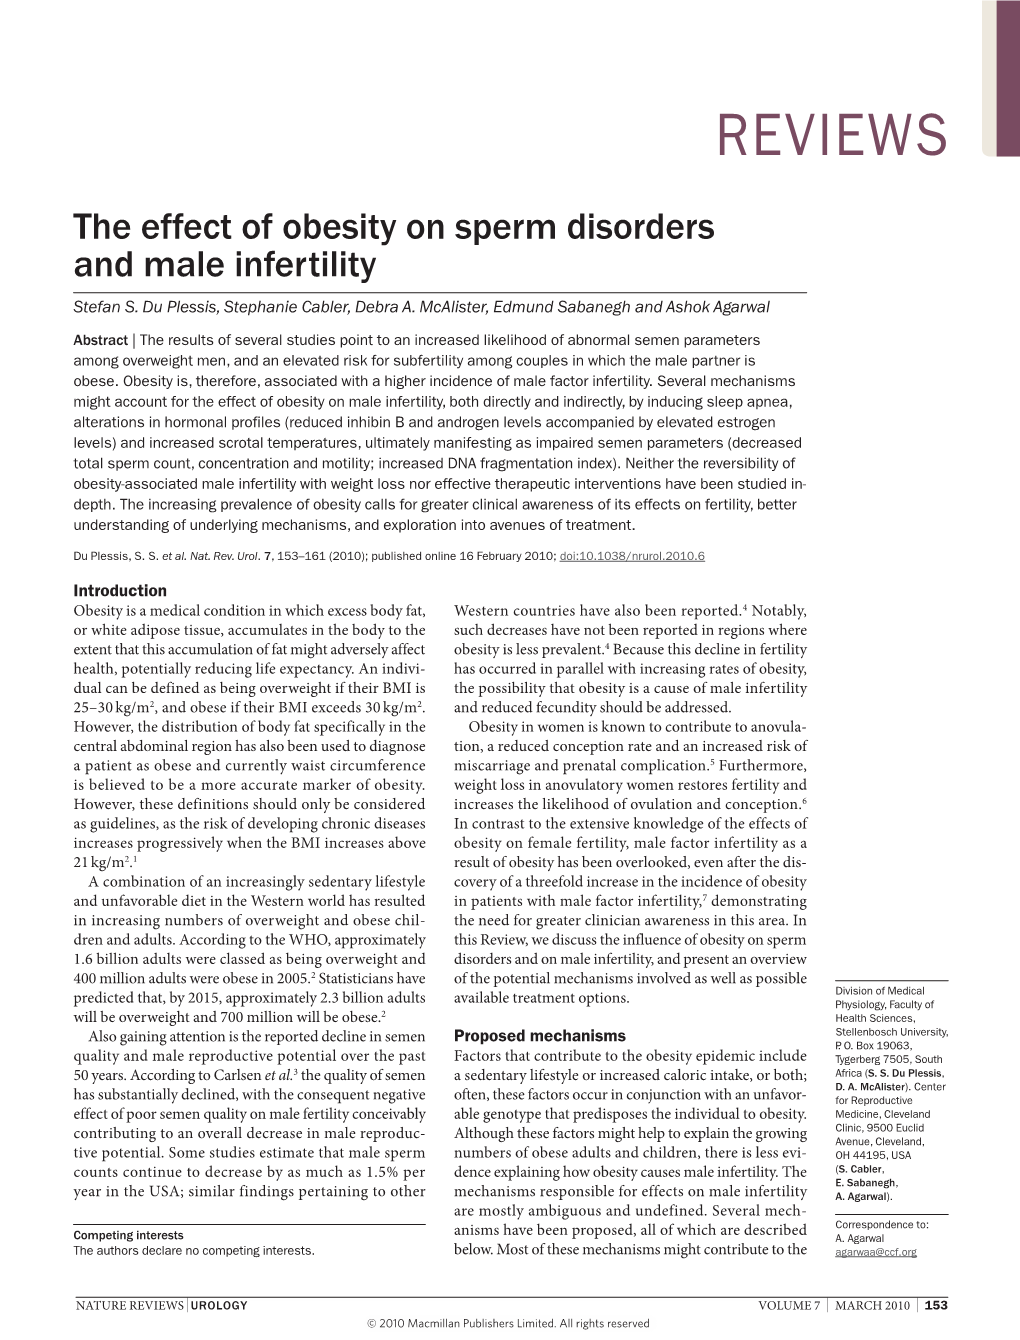 The Effect of Obesity on Sperm Disorders and Male Infertility Stefan S